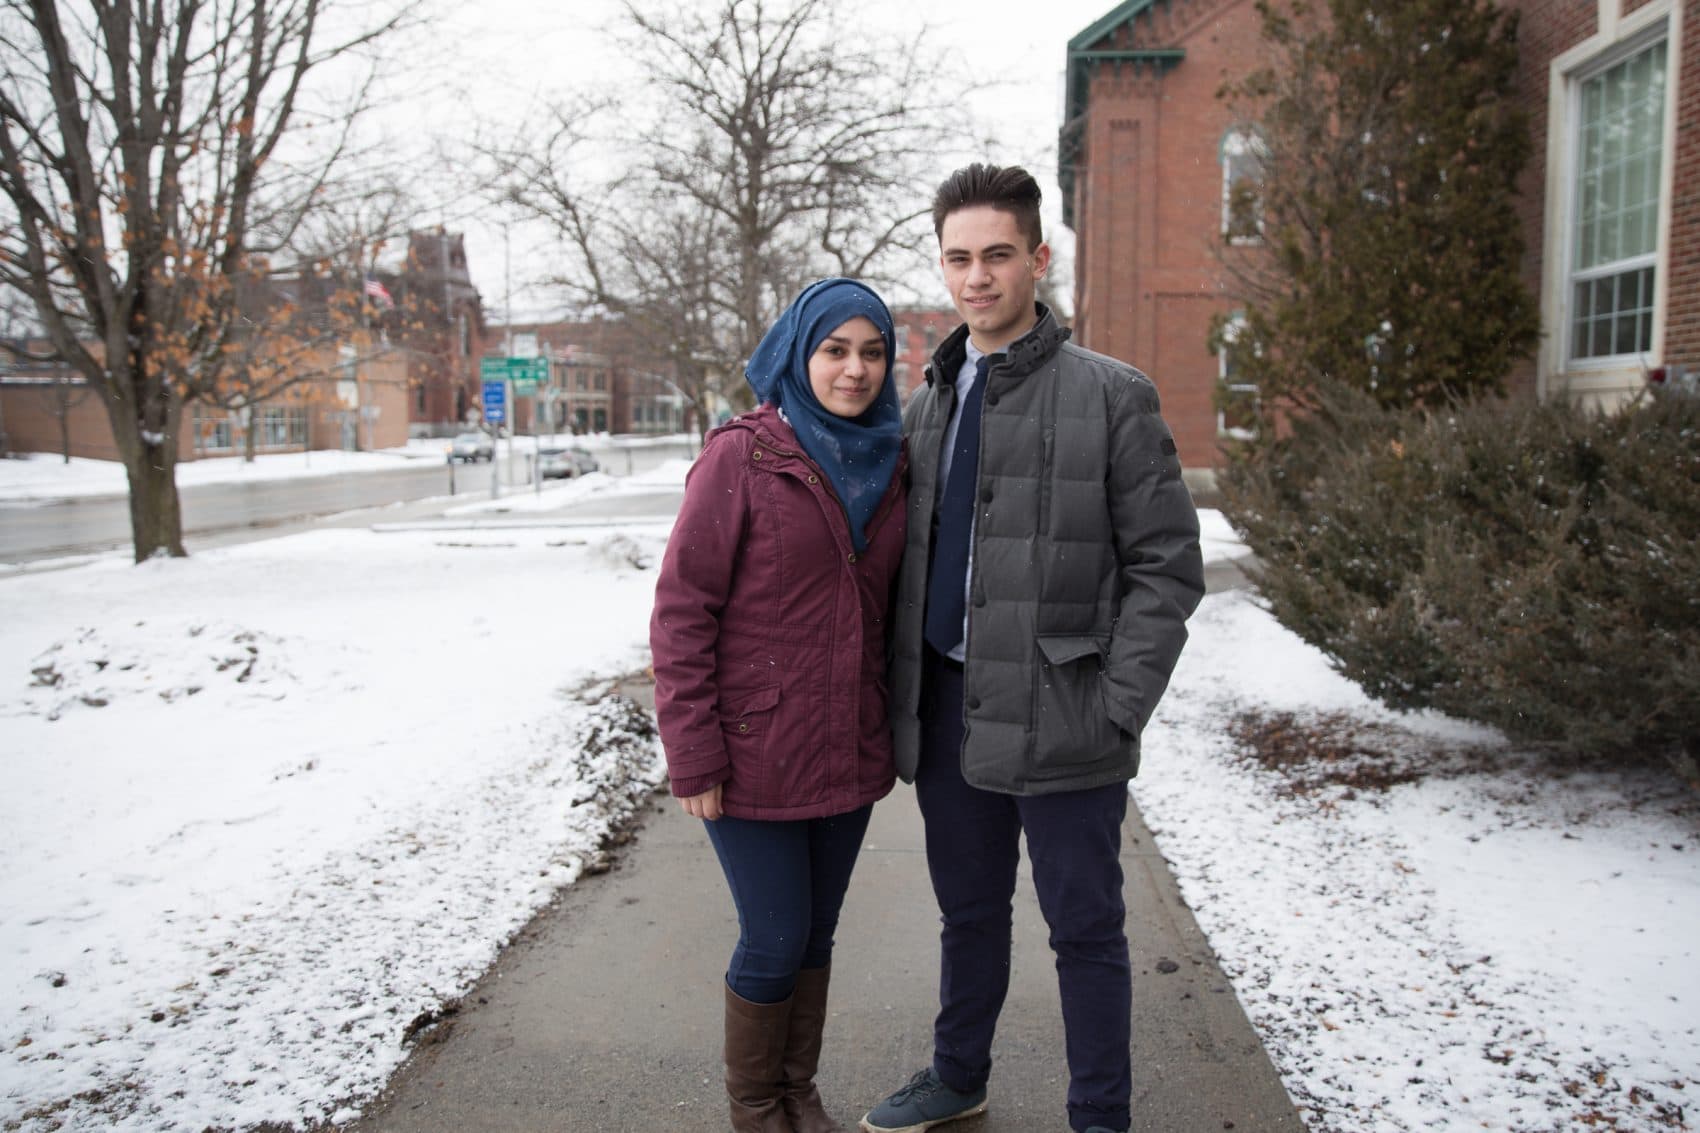 Ghena, left, and Ayman Alsalloumi stand on the St. Johnsbury campus on a snowy January day. Their family is from Homs, Syria, a city torn apart by civil war. (Ryan Caron King for NENC)